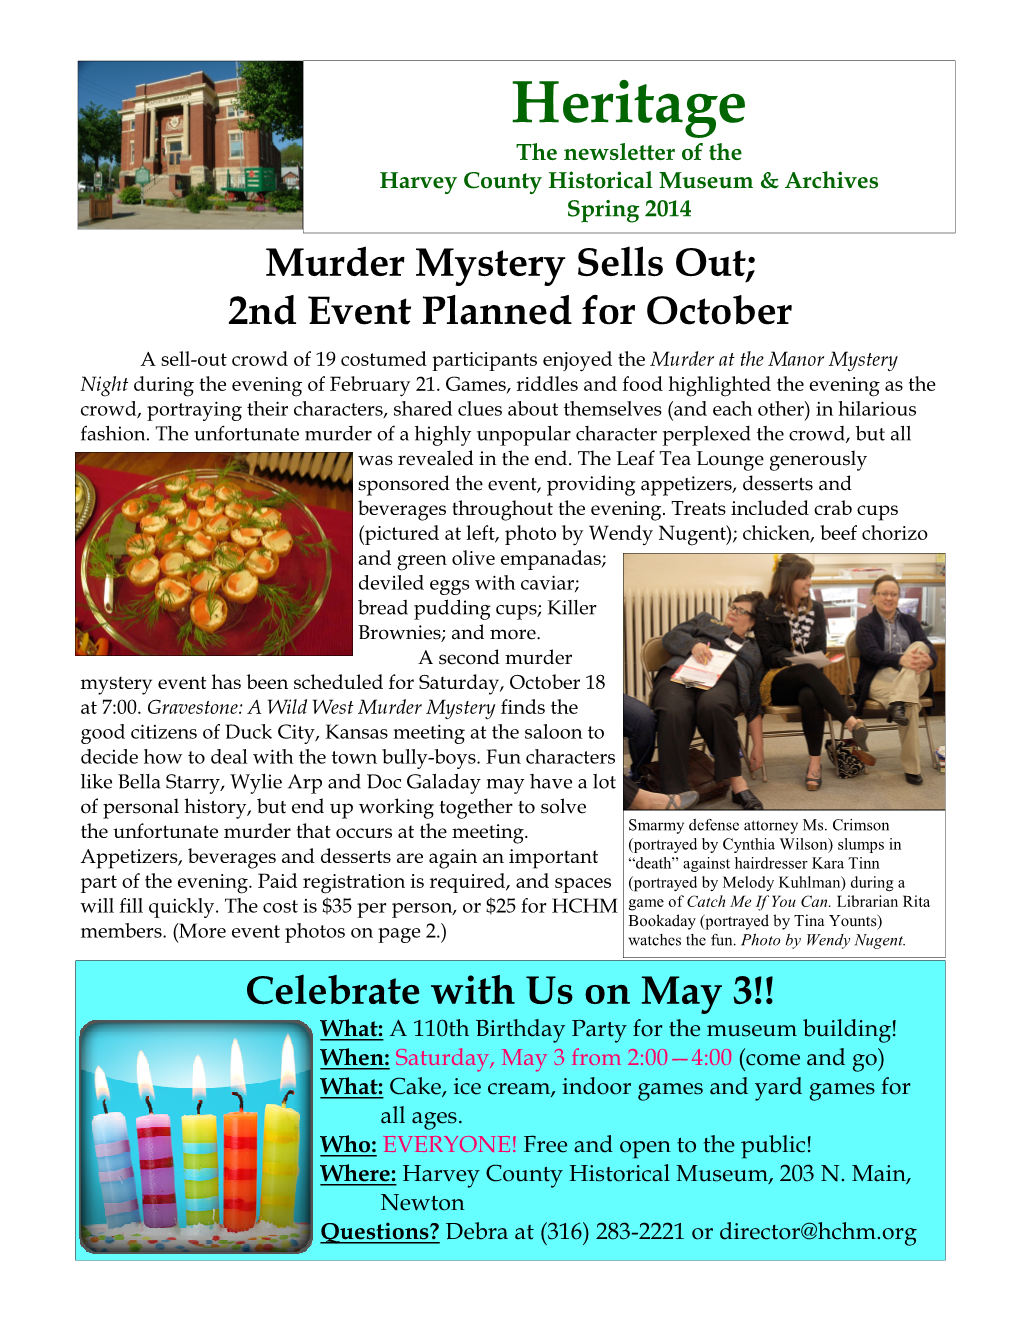 Spring 2014 Murder Mystery Sells Out; 2Nd Event Planned for October